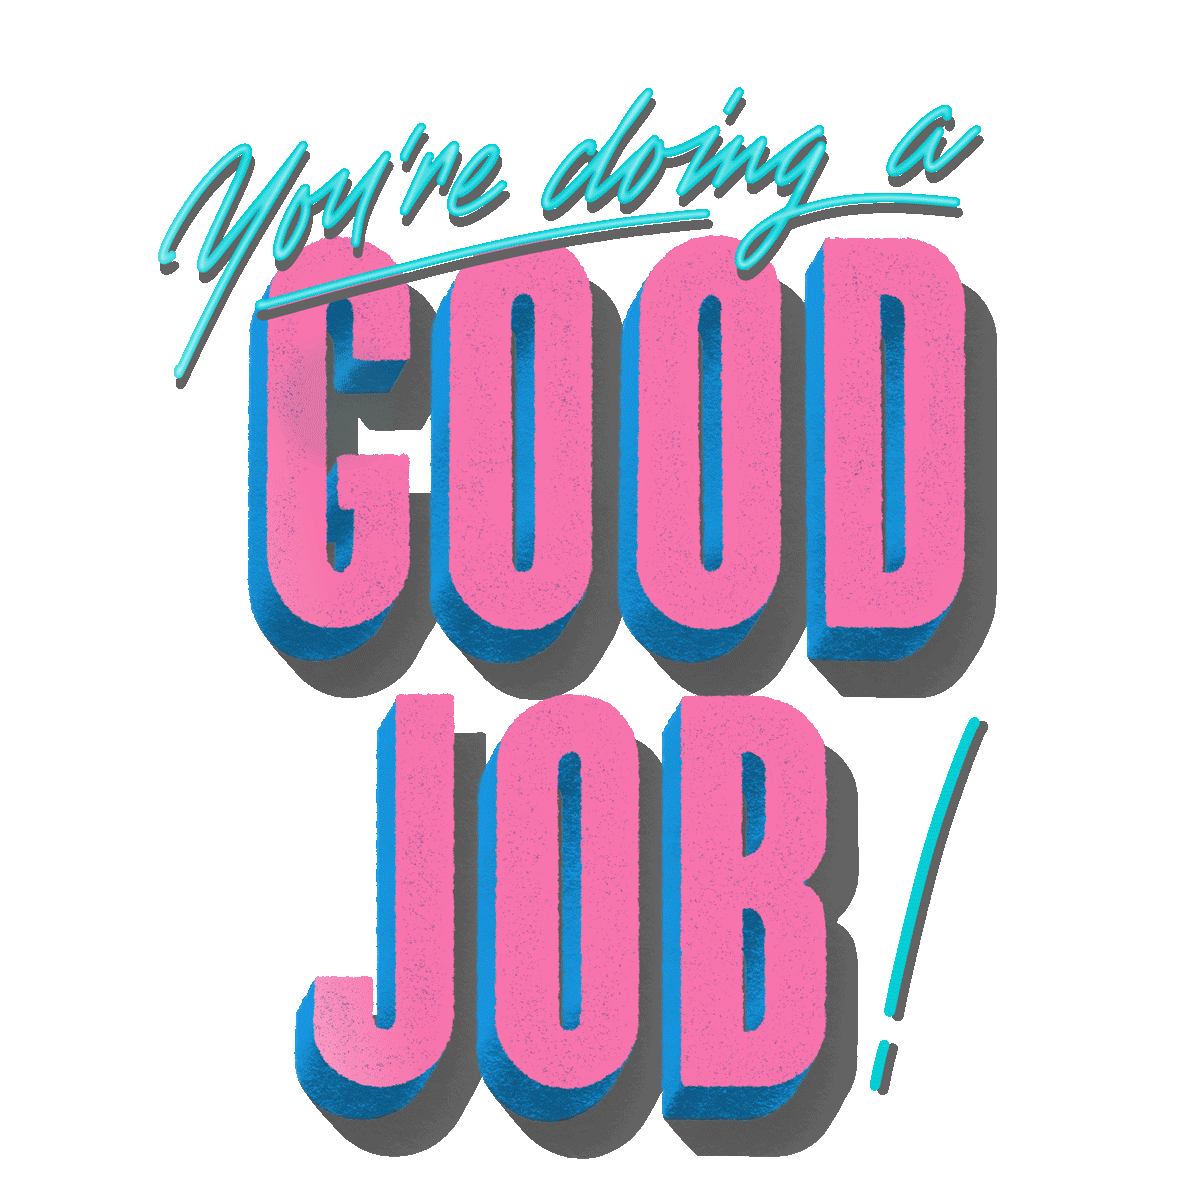 Way To Go Good Job Sticker by Dirty Bandits for iOS & Android GIPHY